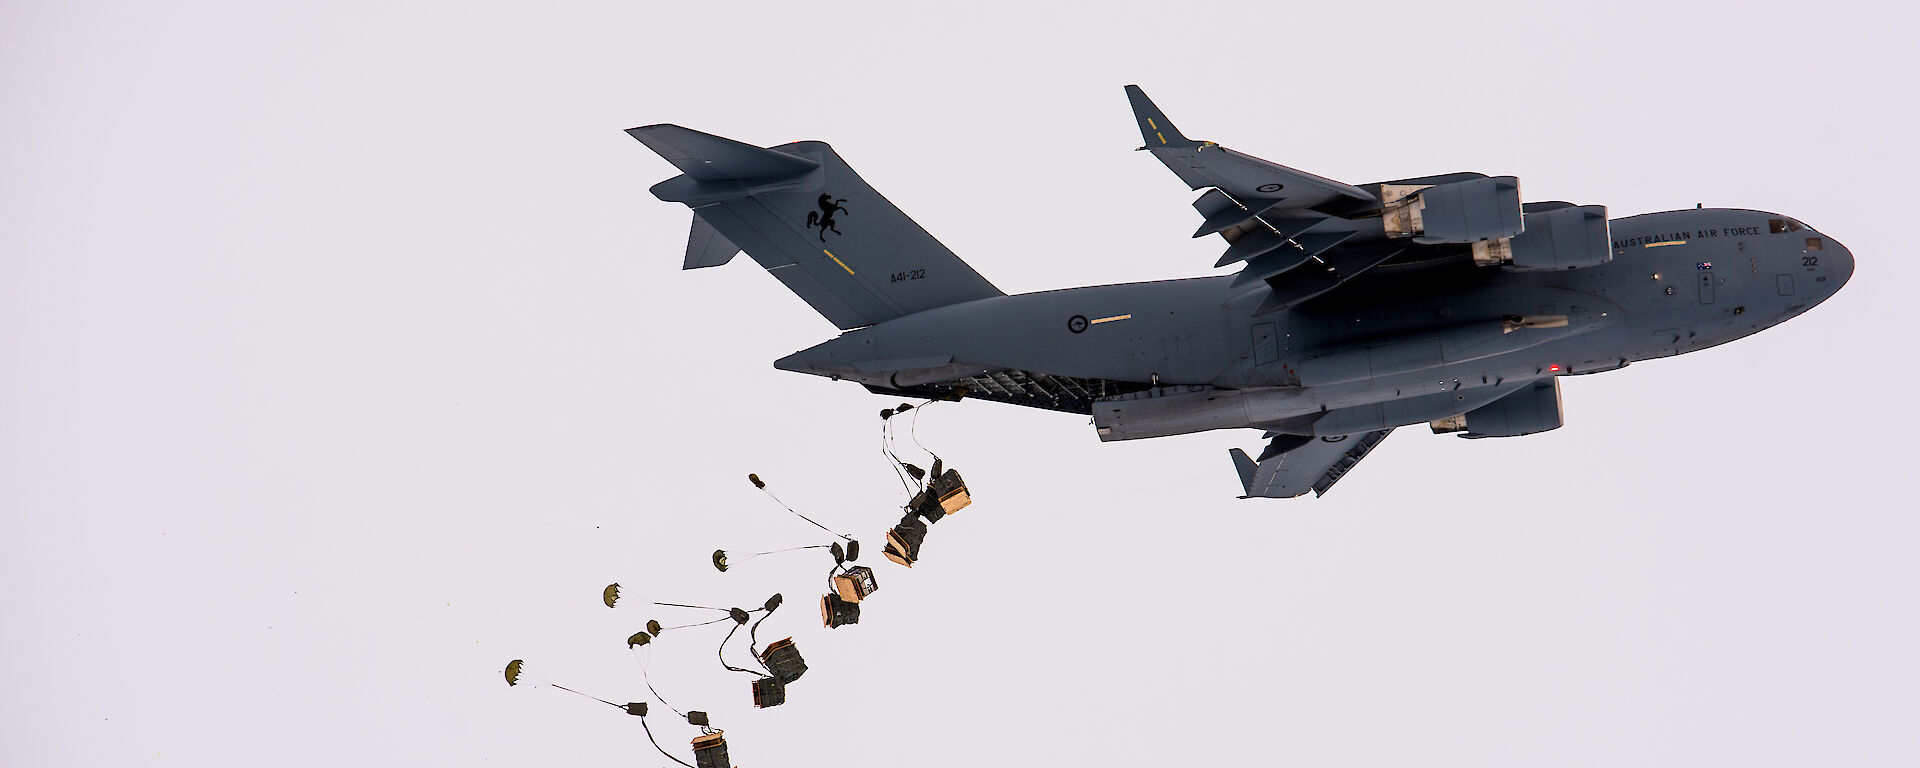 Pallets of supplies attached to parachutes drop from the tail end of a C-17A aircraft